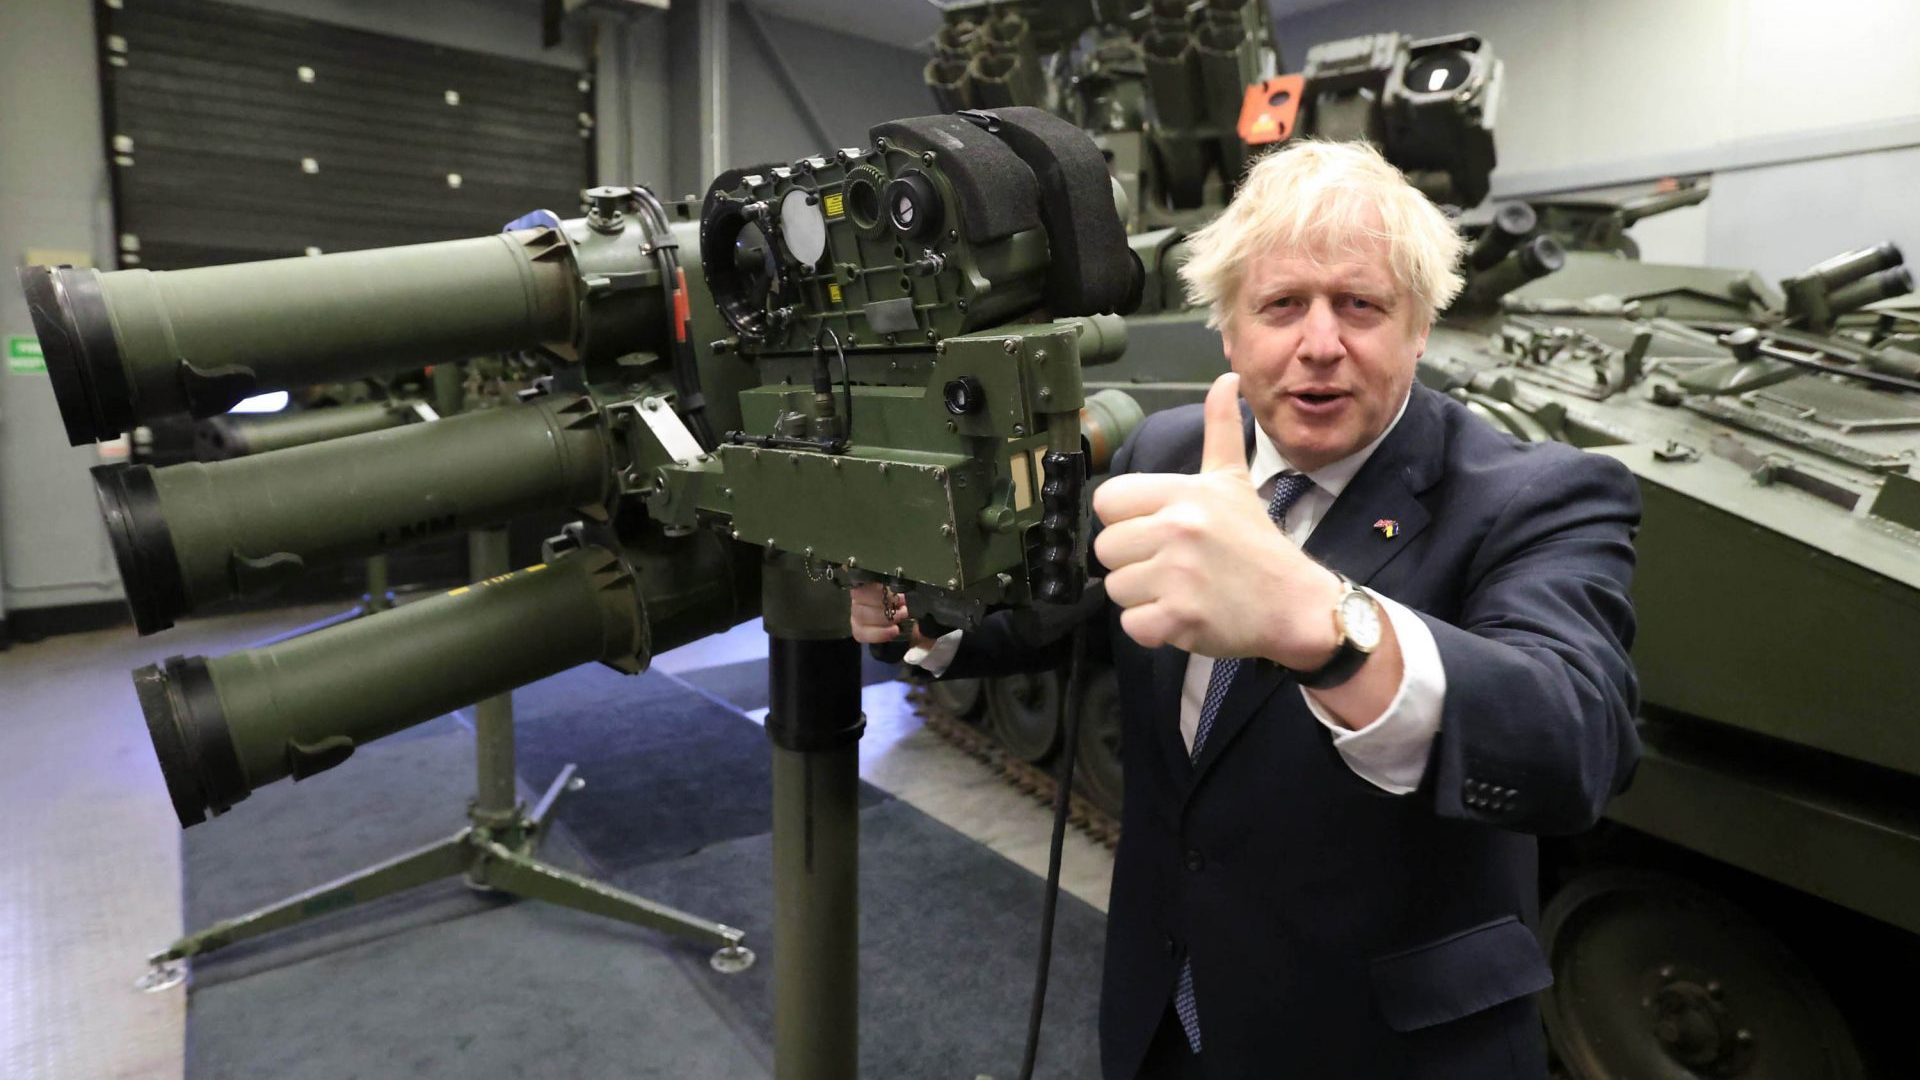 Boris Johnson with a Mark 3 shoulder launch LML missile system at Thales weapons manufacturer during a visit to Northern Ireland (Photo by Liam McBurney - Pool/Getty Images)